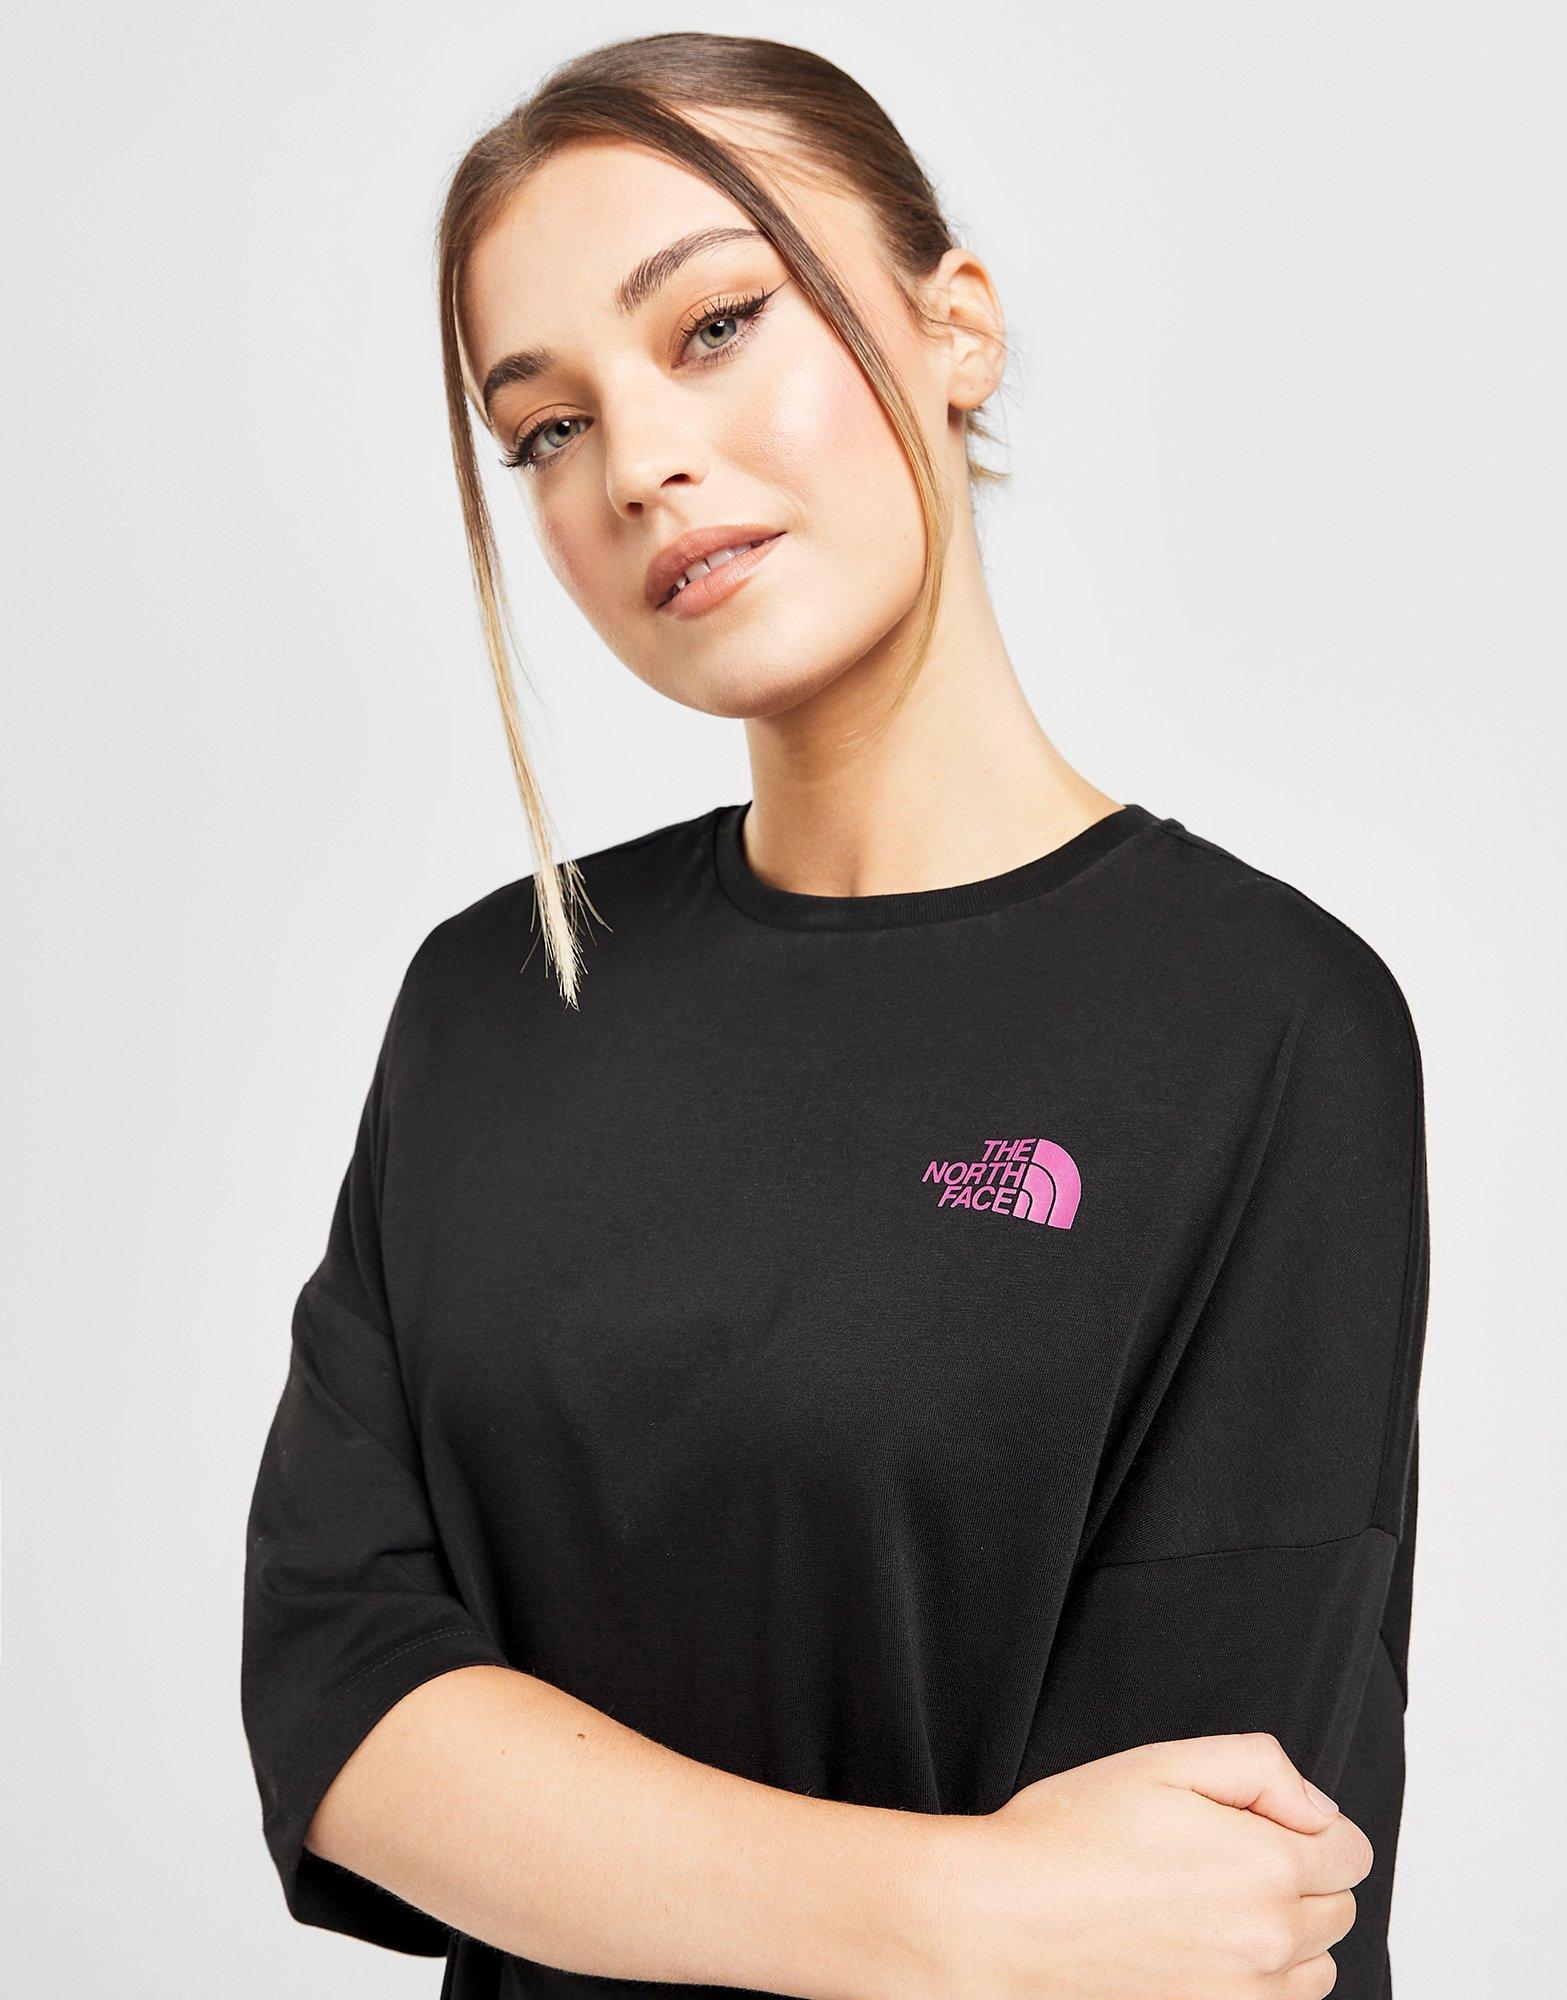 The North Face t-shirt dress in pink Exclusive at ASOS